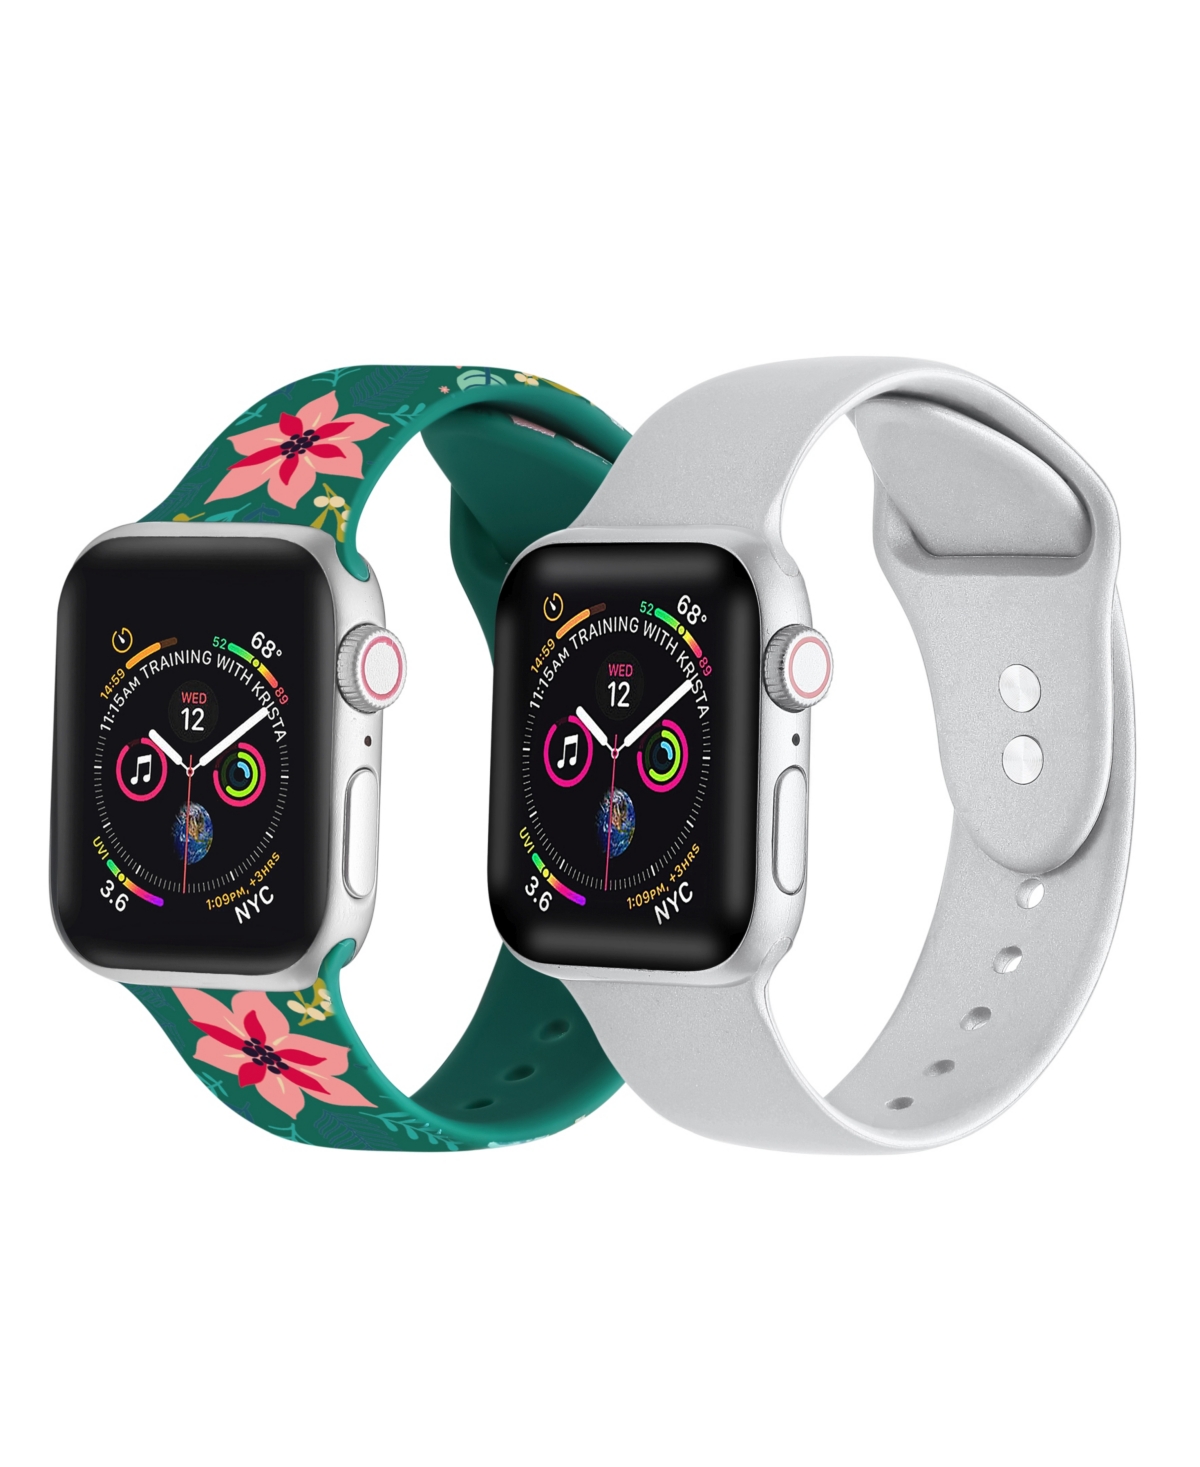 Men's and Women's Green Floral Silver-Tone Metallic 2 Piece Silicone Band for Apple Watch 42mm - Multi